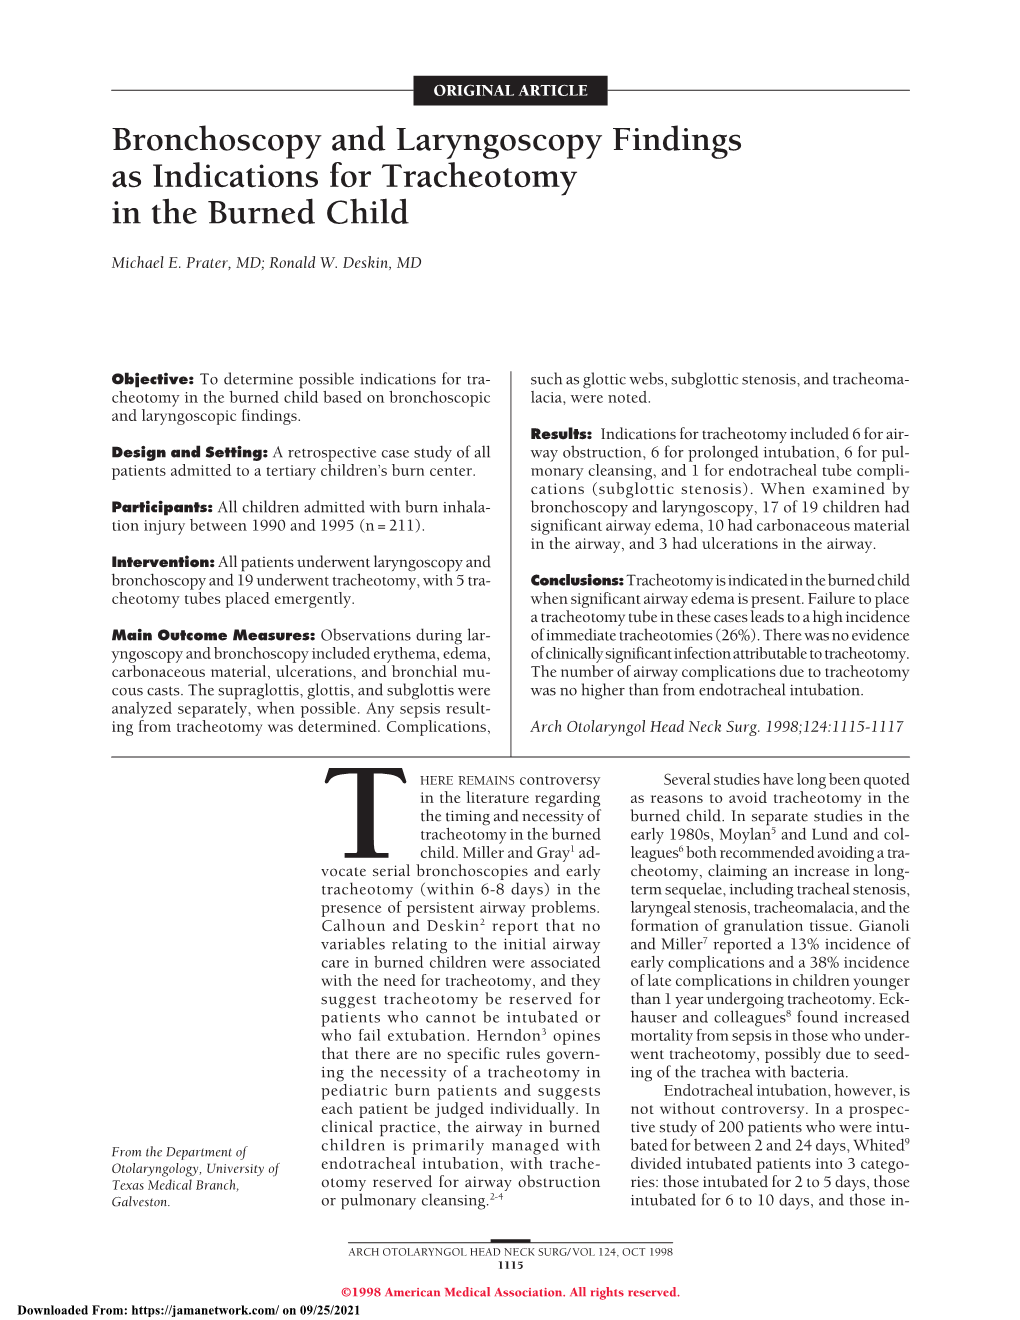 Bronchoscopy and Laryngoscopy Findings As Indications for Tracheotomy in the Burned Child